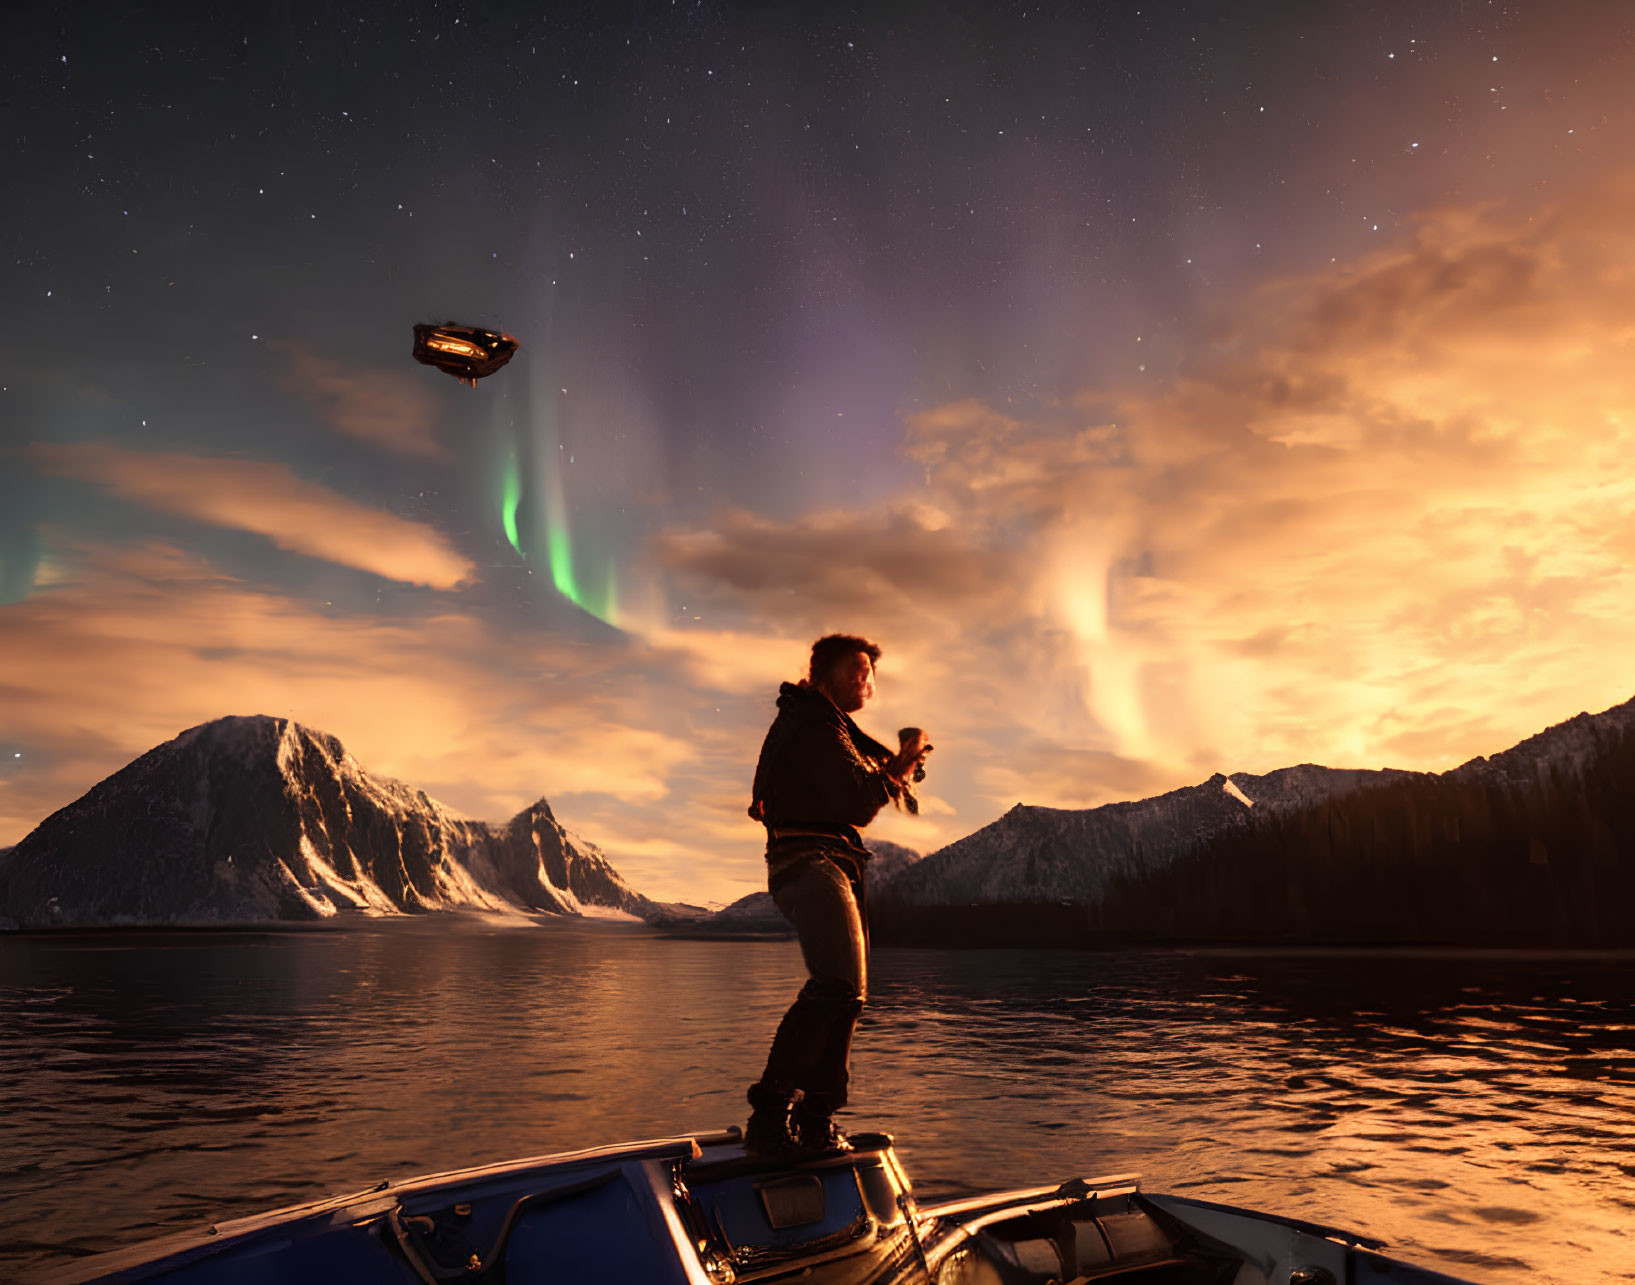 Person playing violin on boat under northern lights and futuristic vehicle in serene waters.